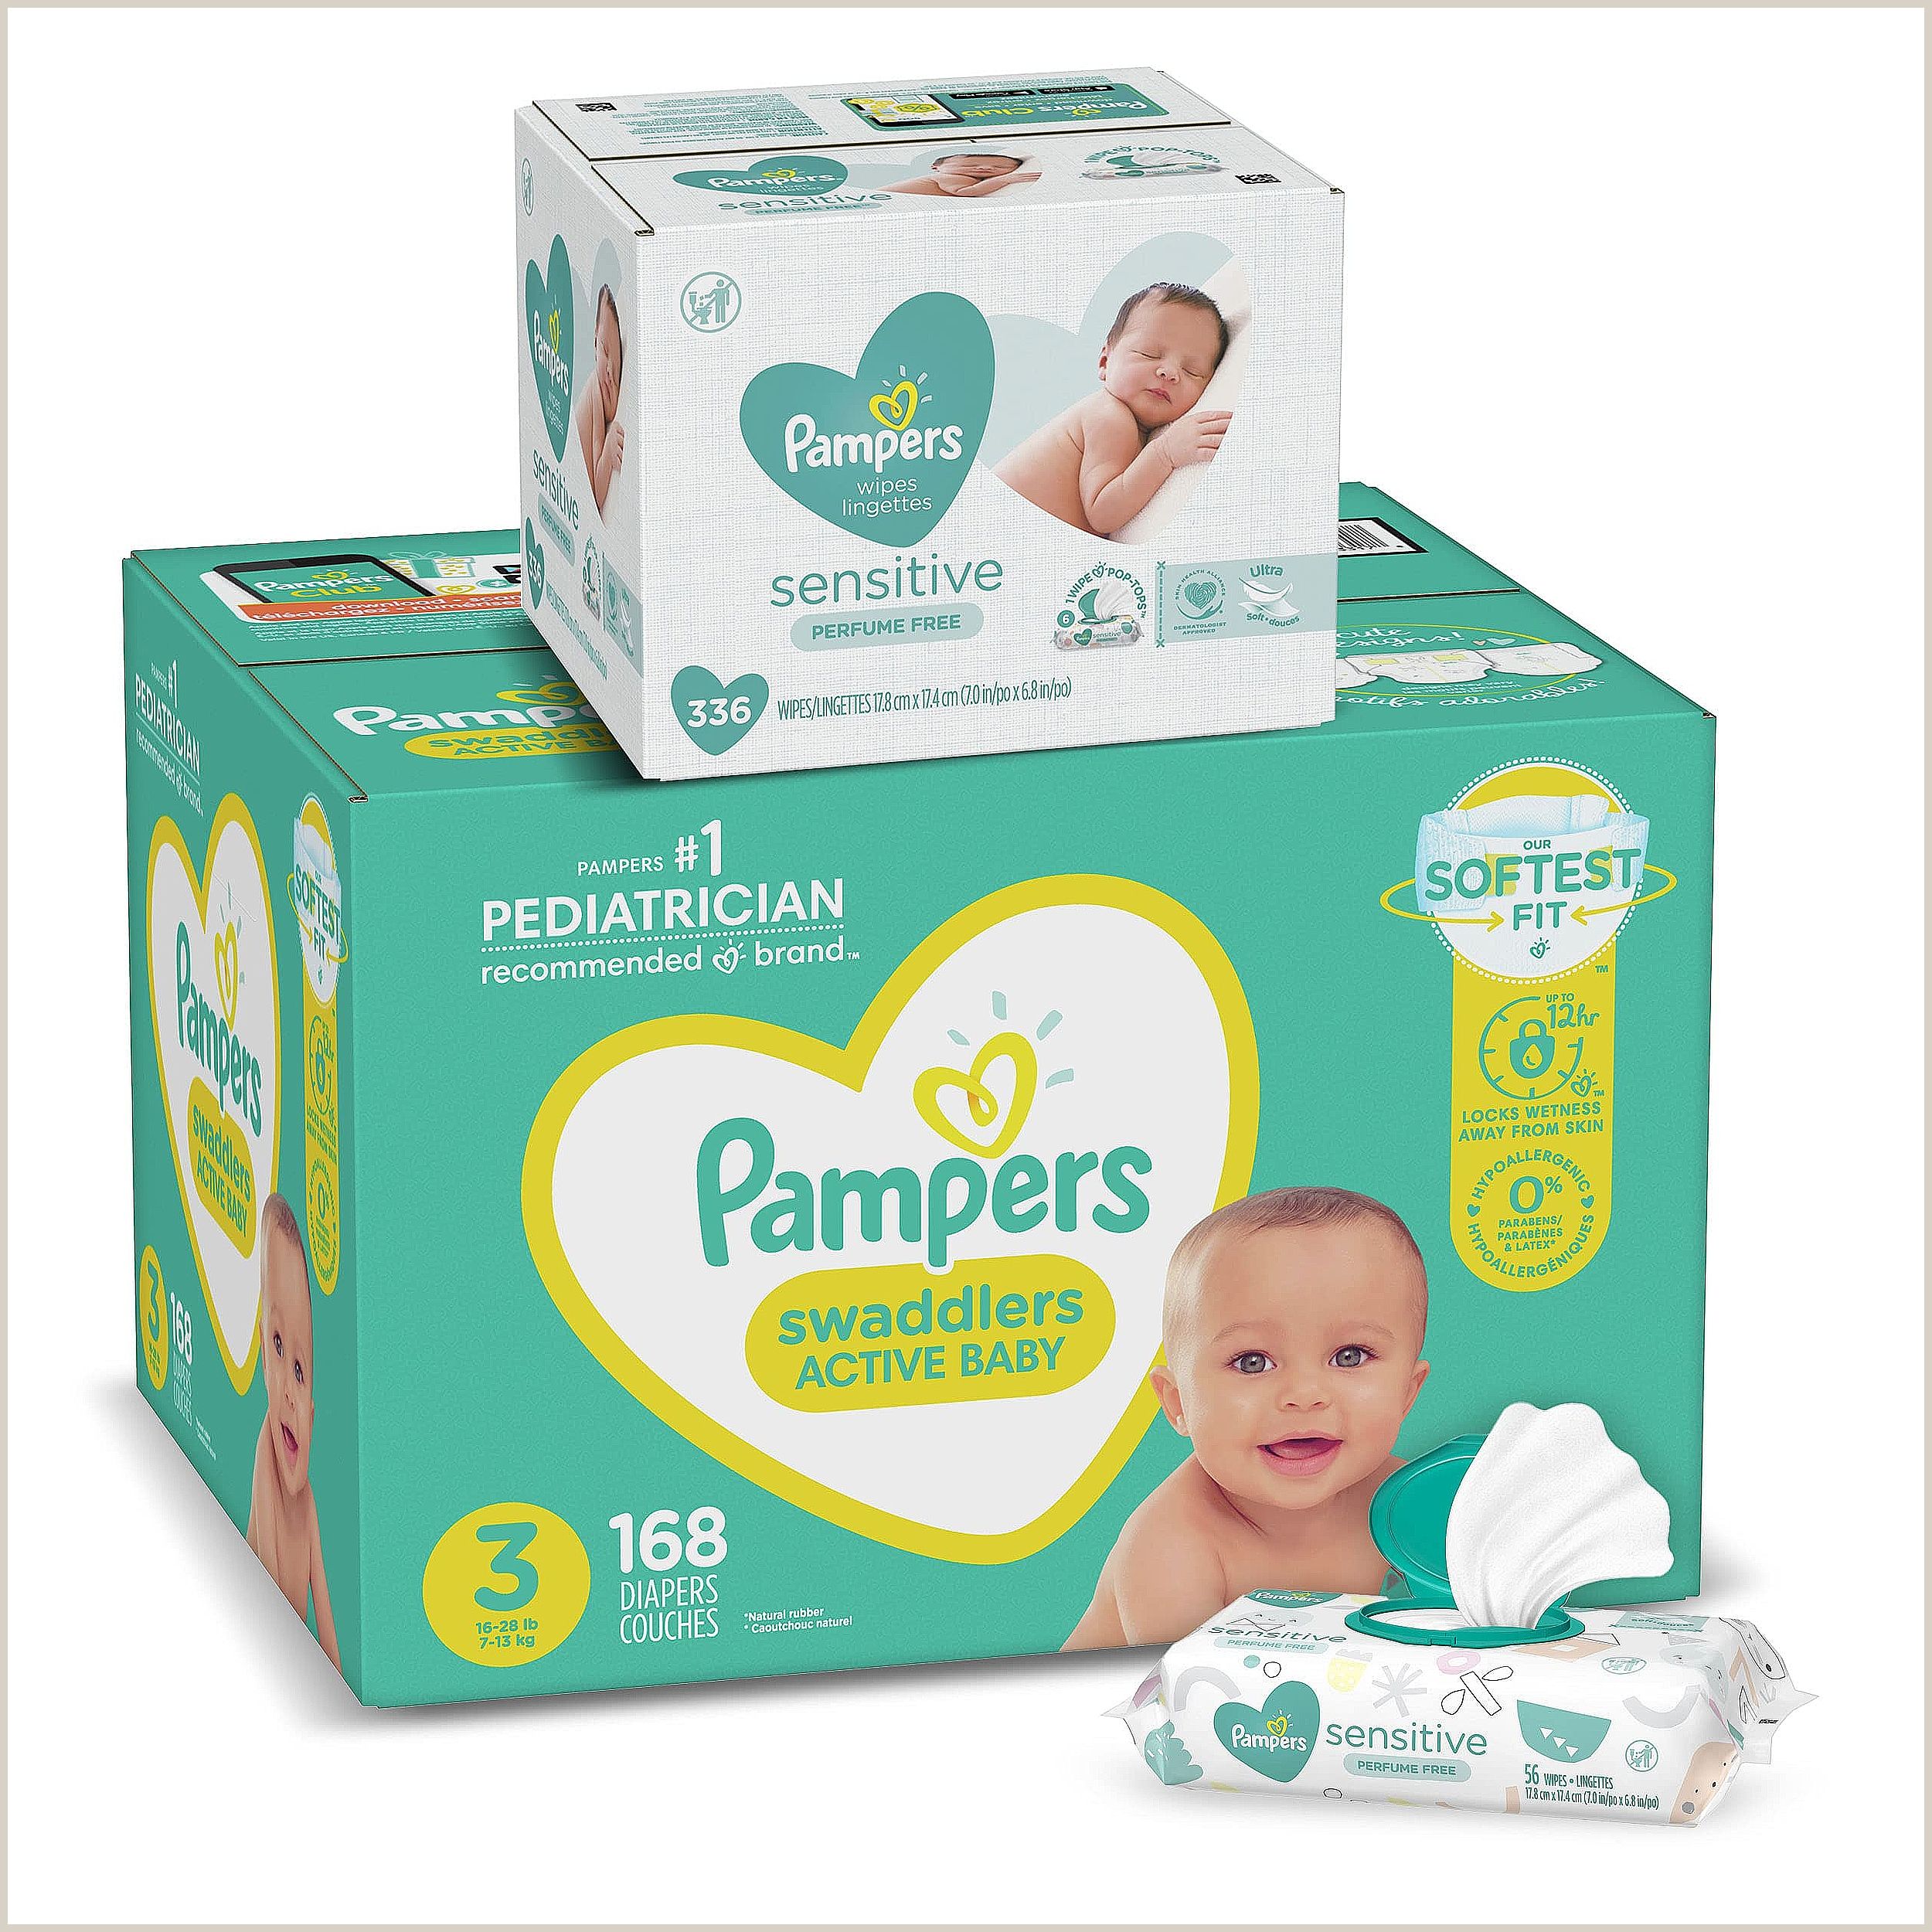 pampers smiesne